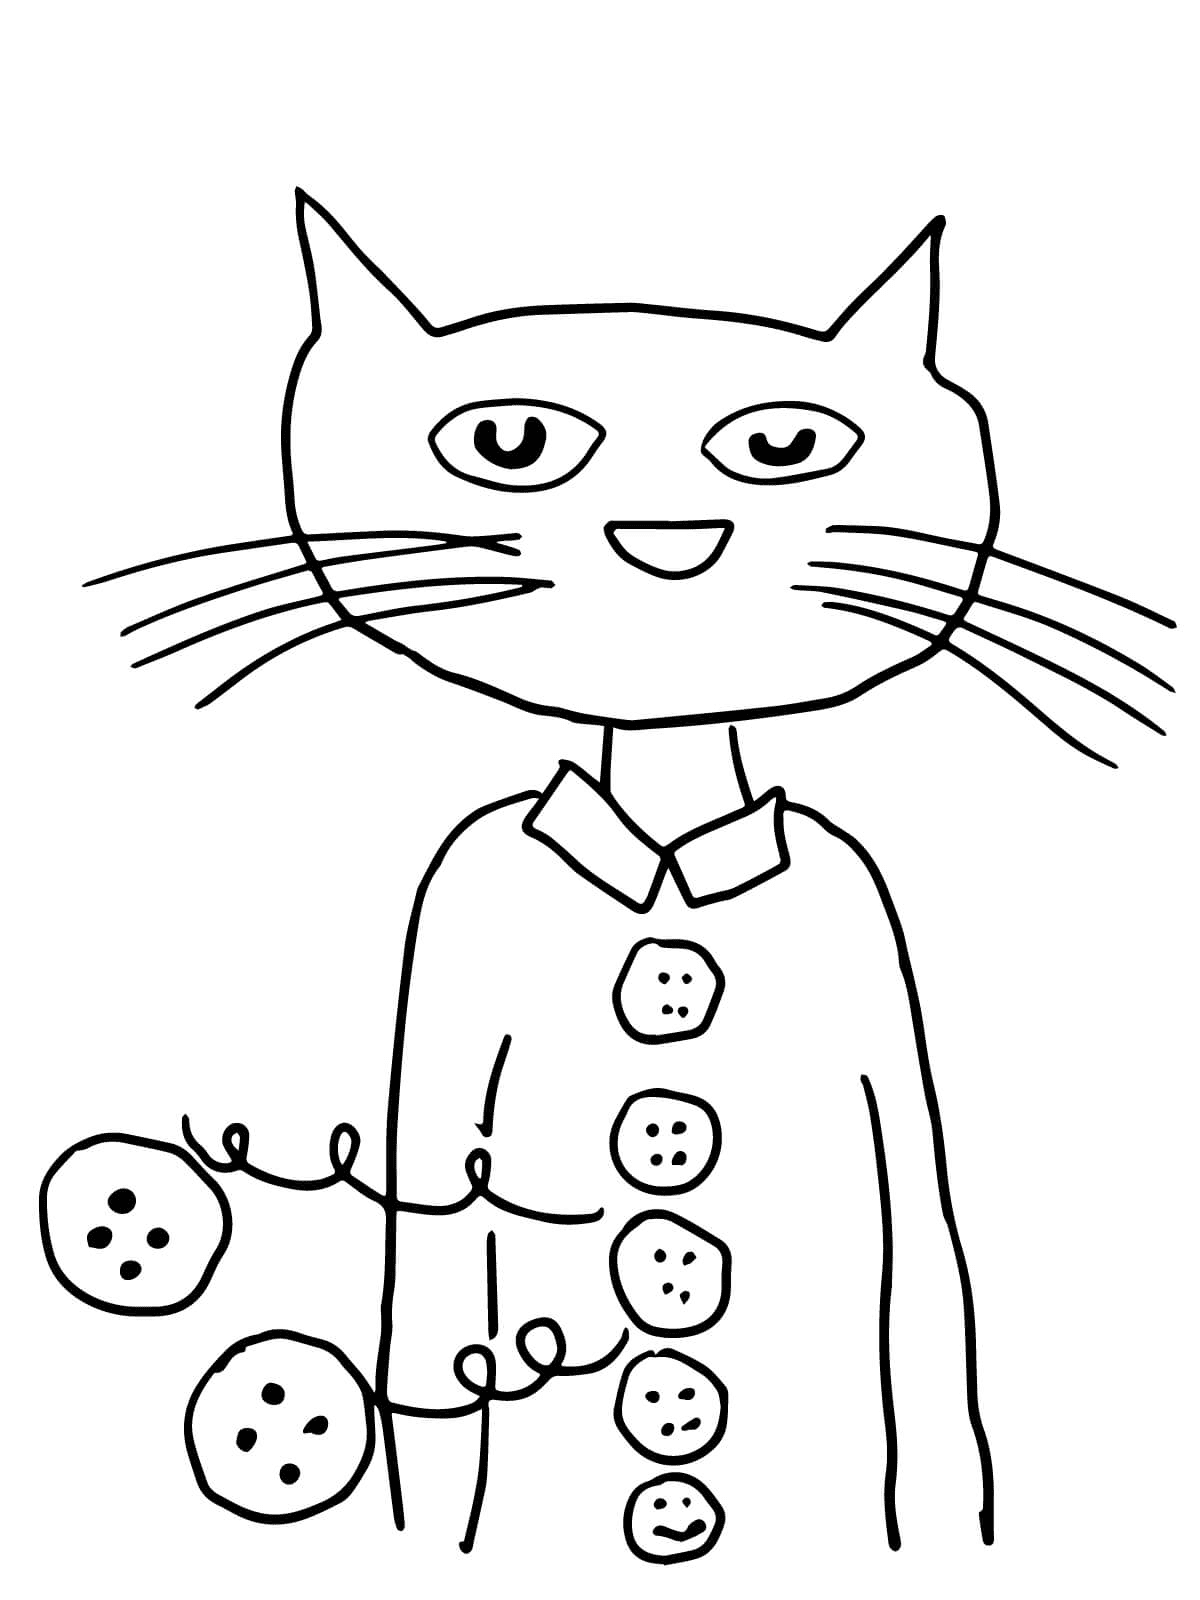 Pete the Cat Groovy Buttons Coloring Page